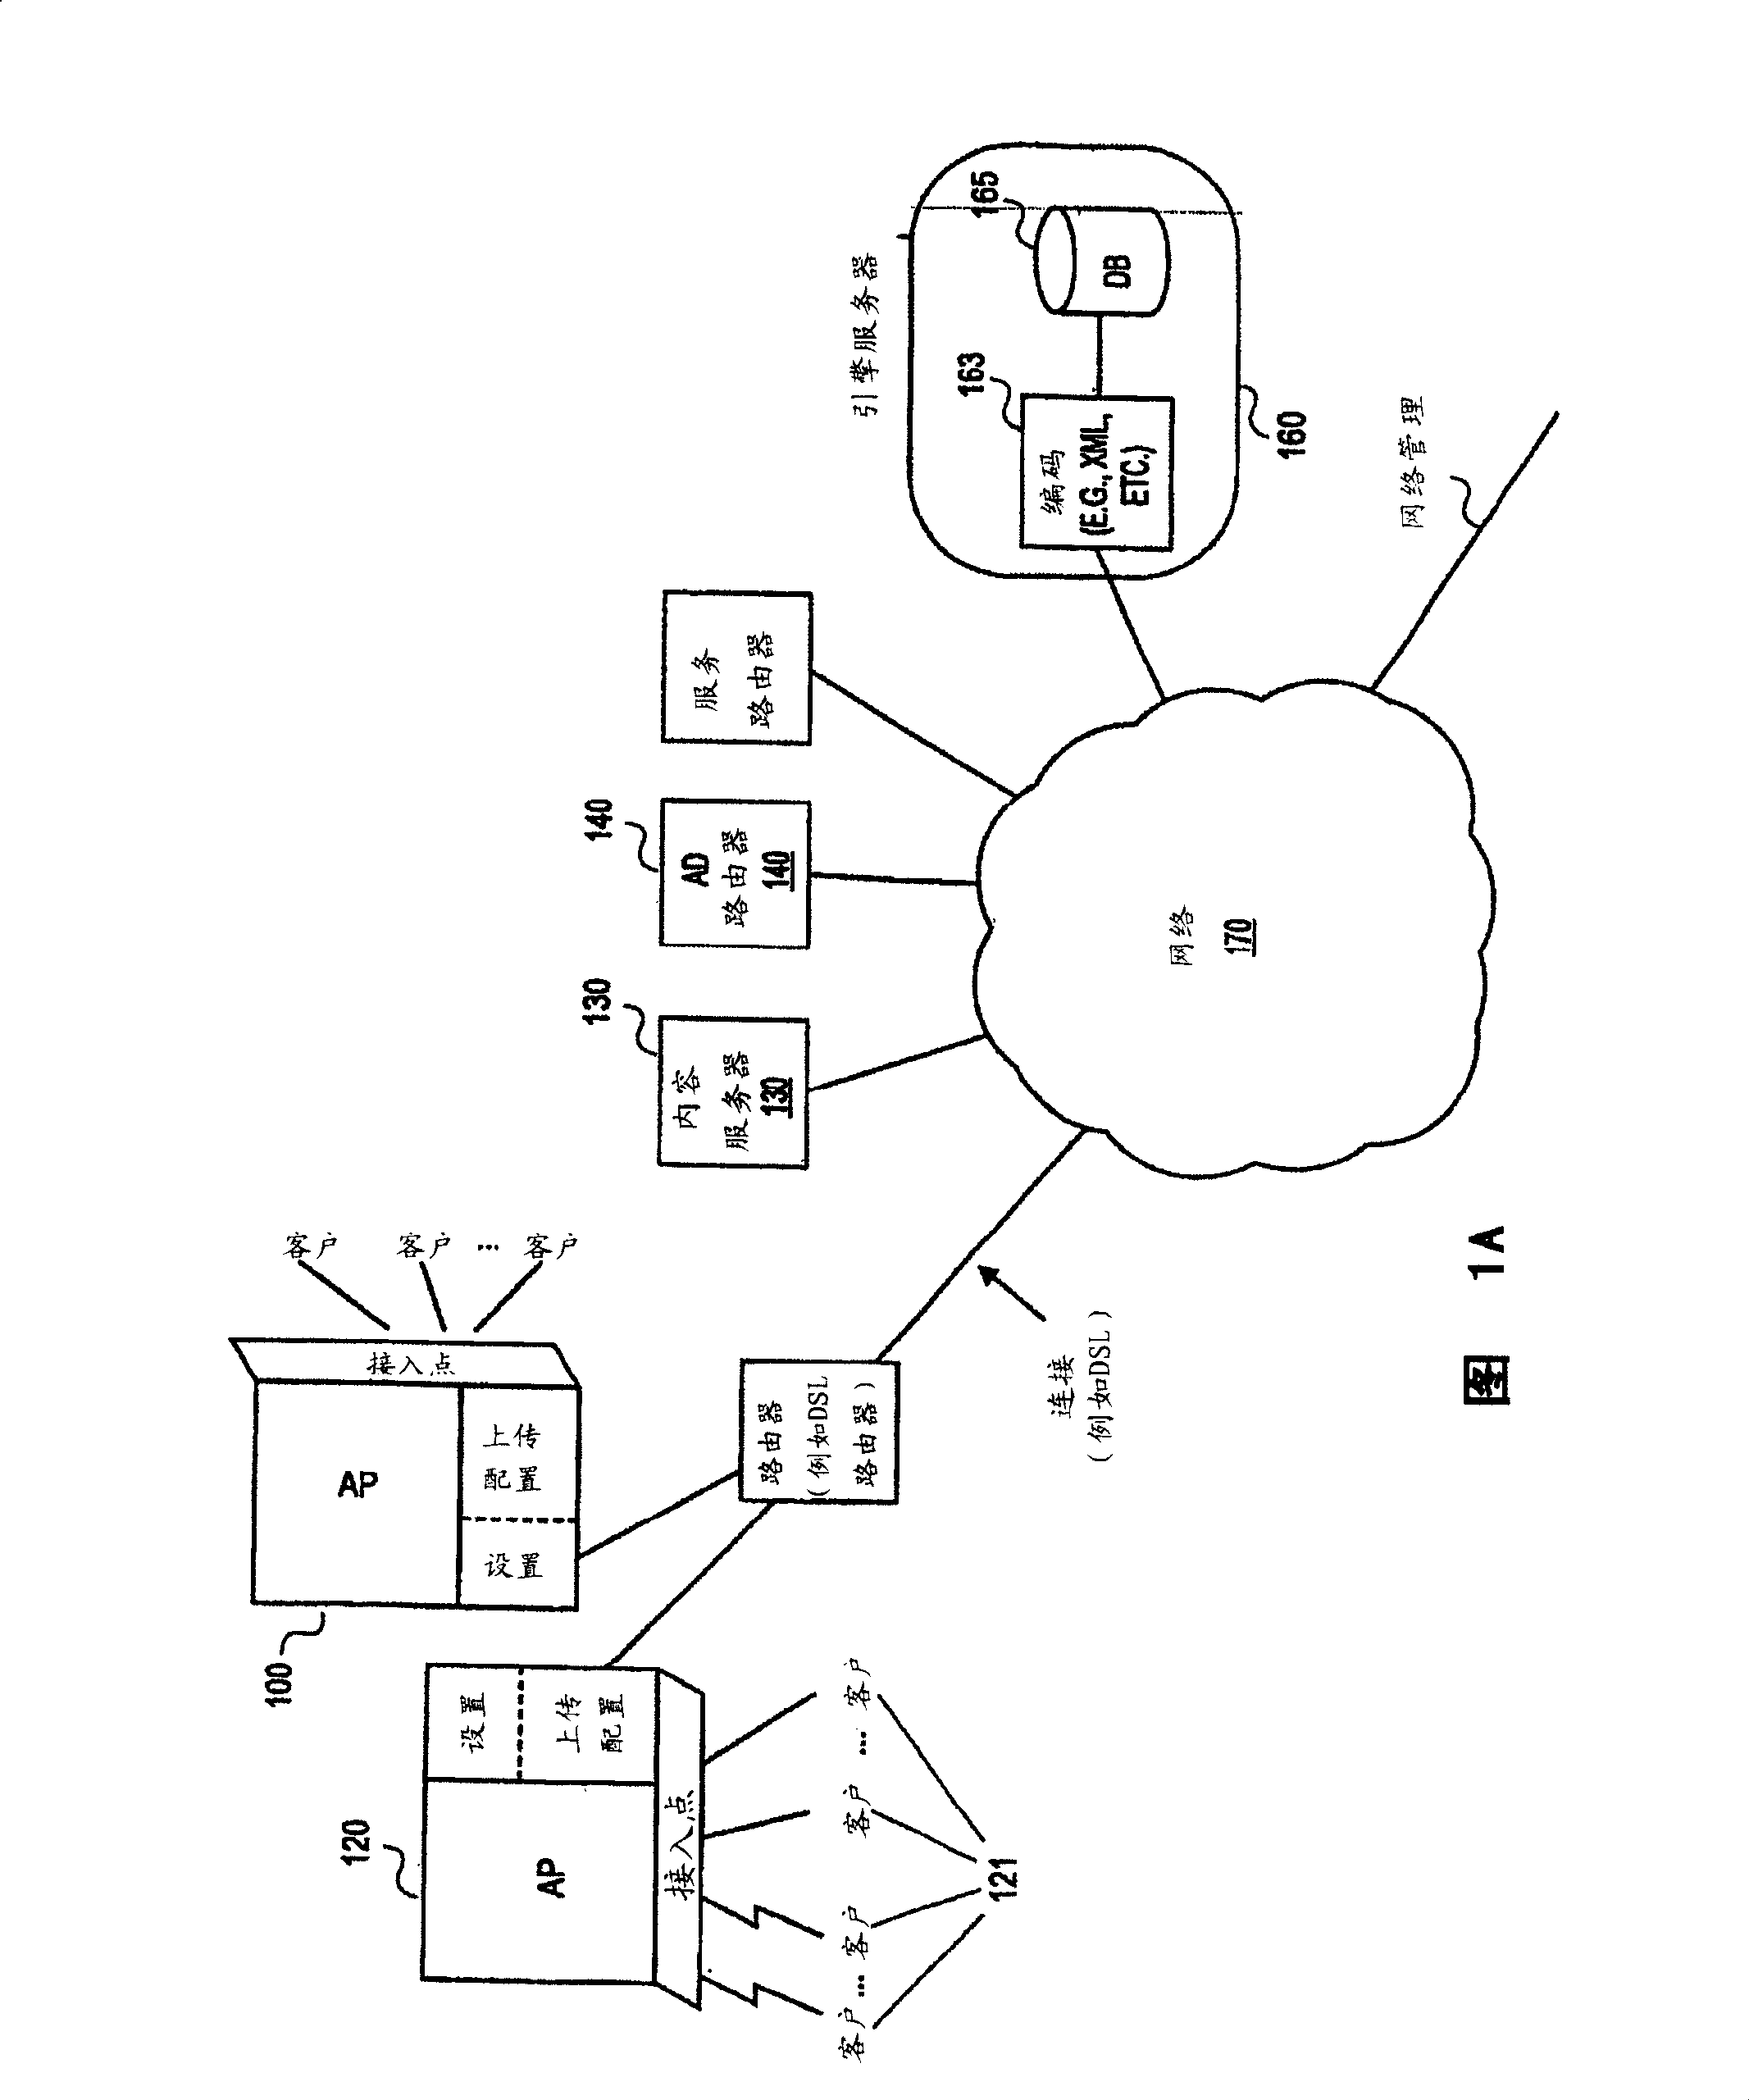 Systems and methods of network operation and information processing, including data acquisition, processing and provision and/or interoperability features